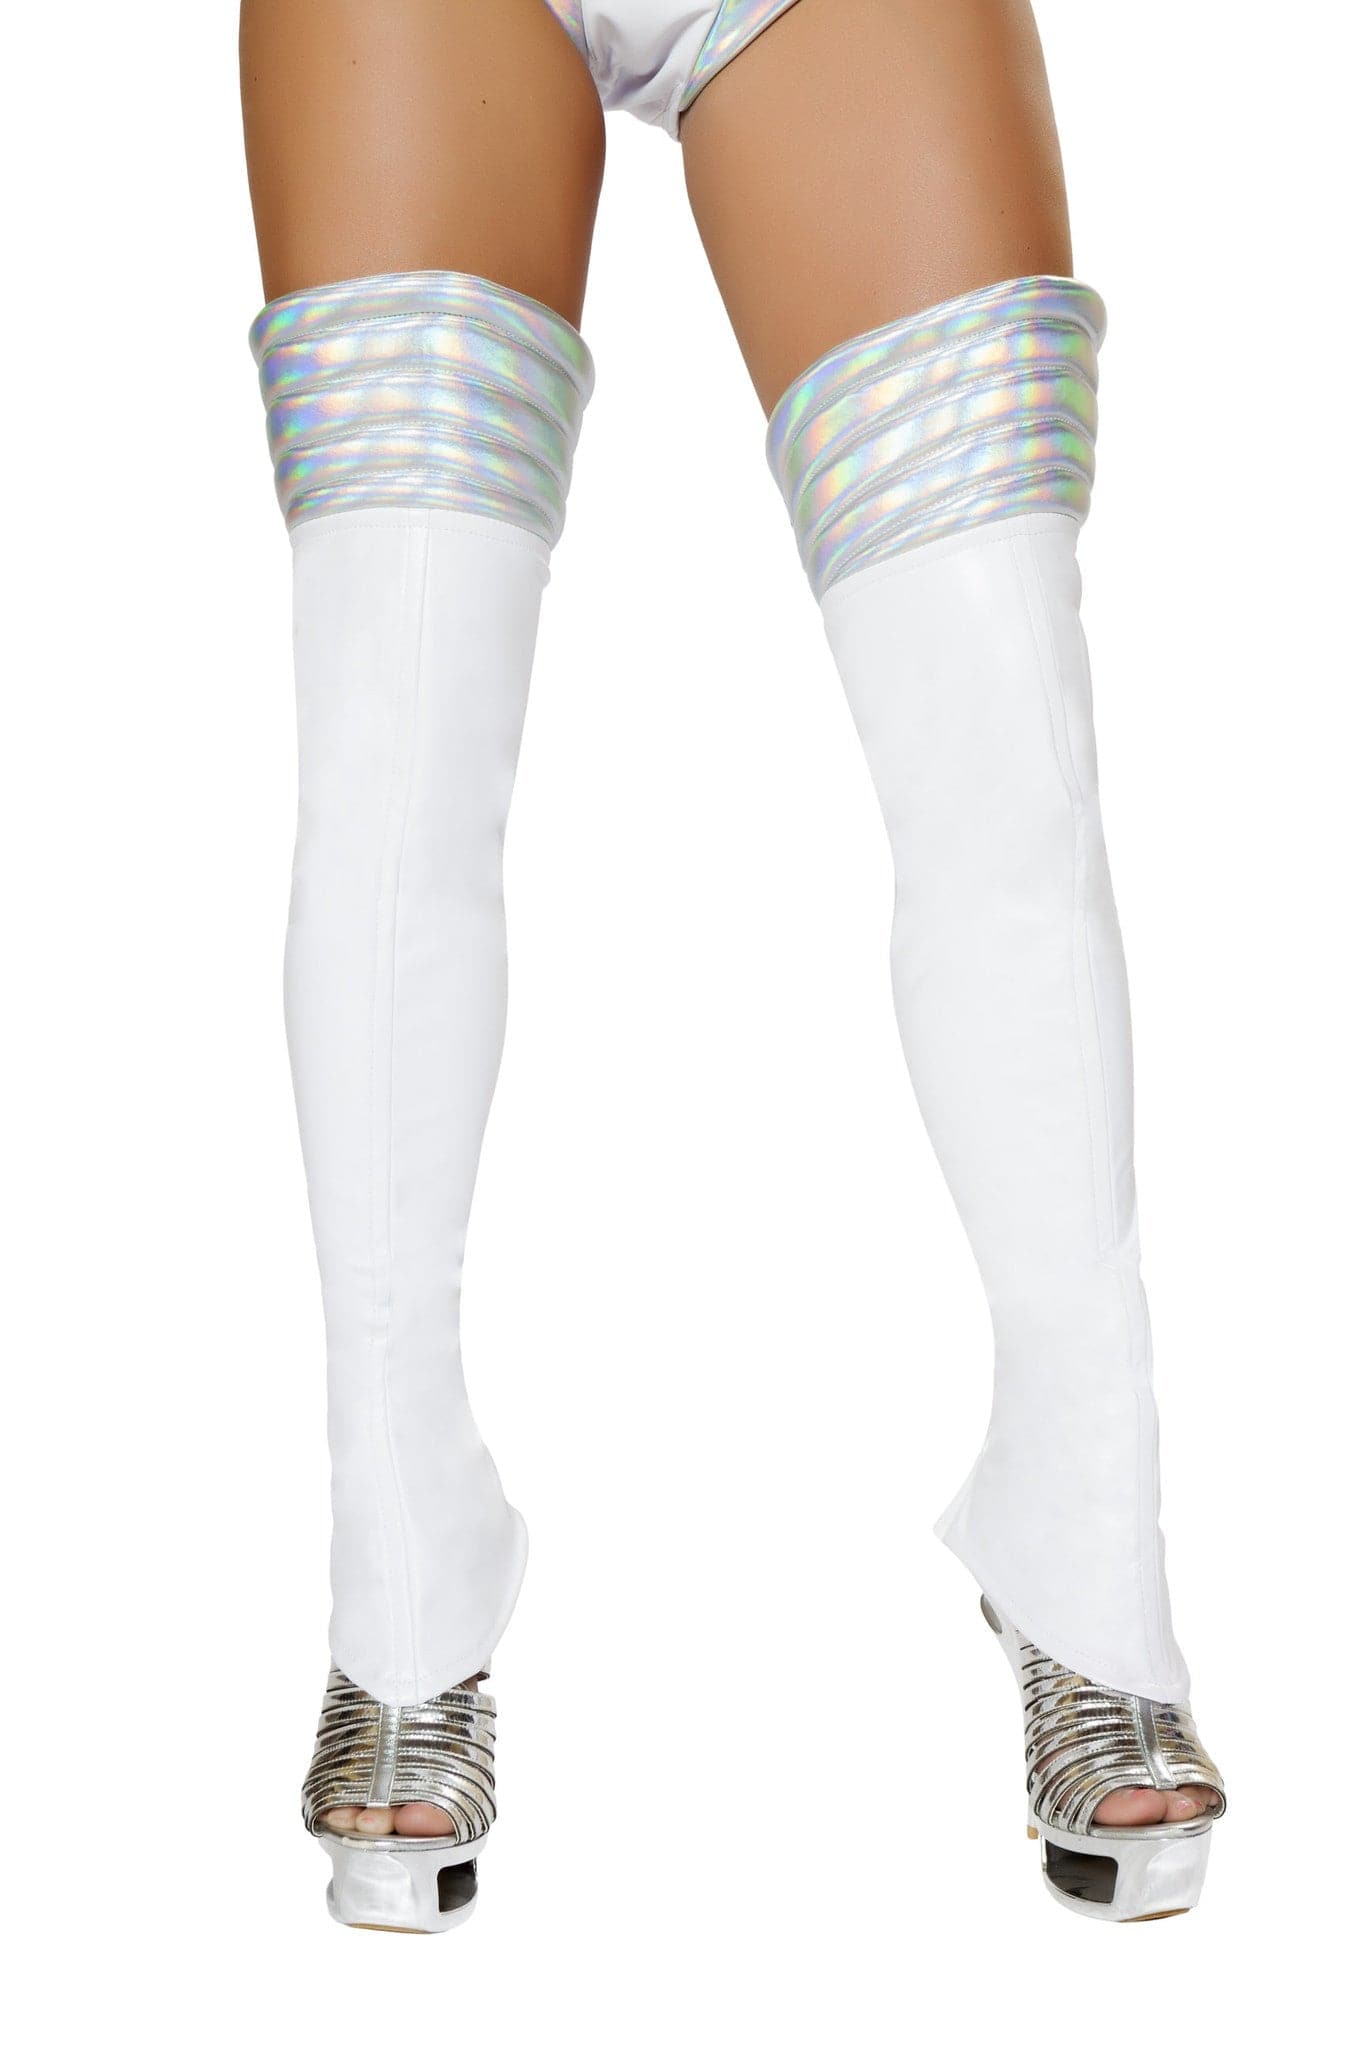 2pc. Space Galaxy Soldier Thigh High Leggings Costume Accessories - For Love of Lingerie